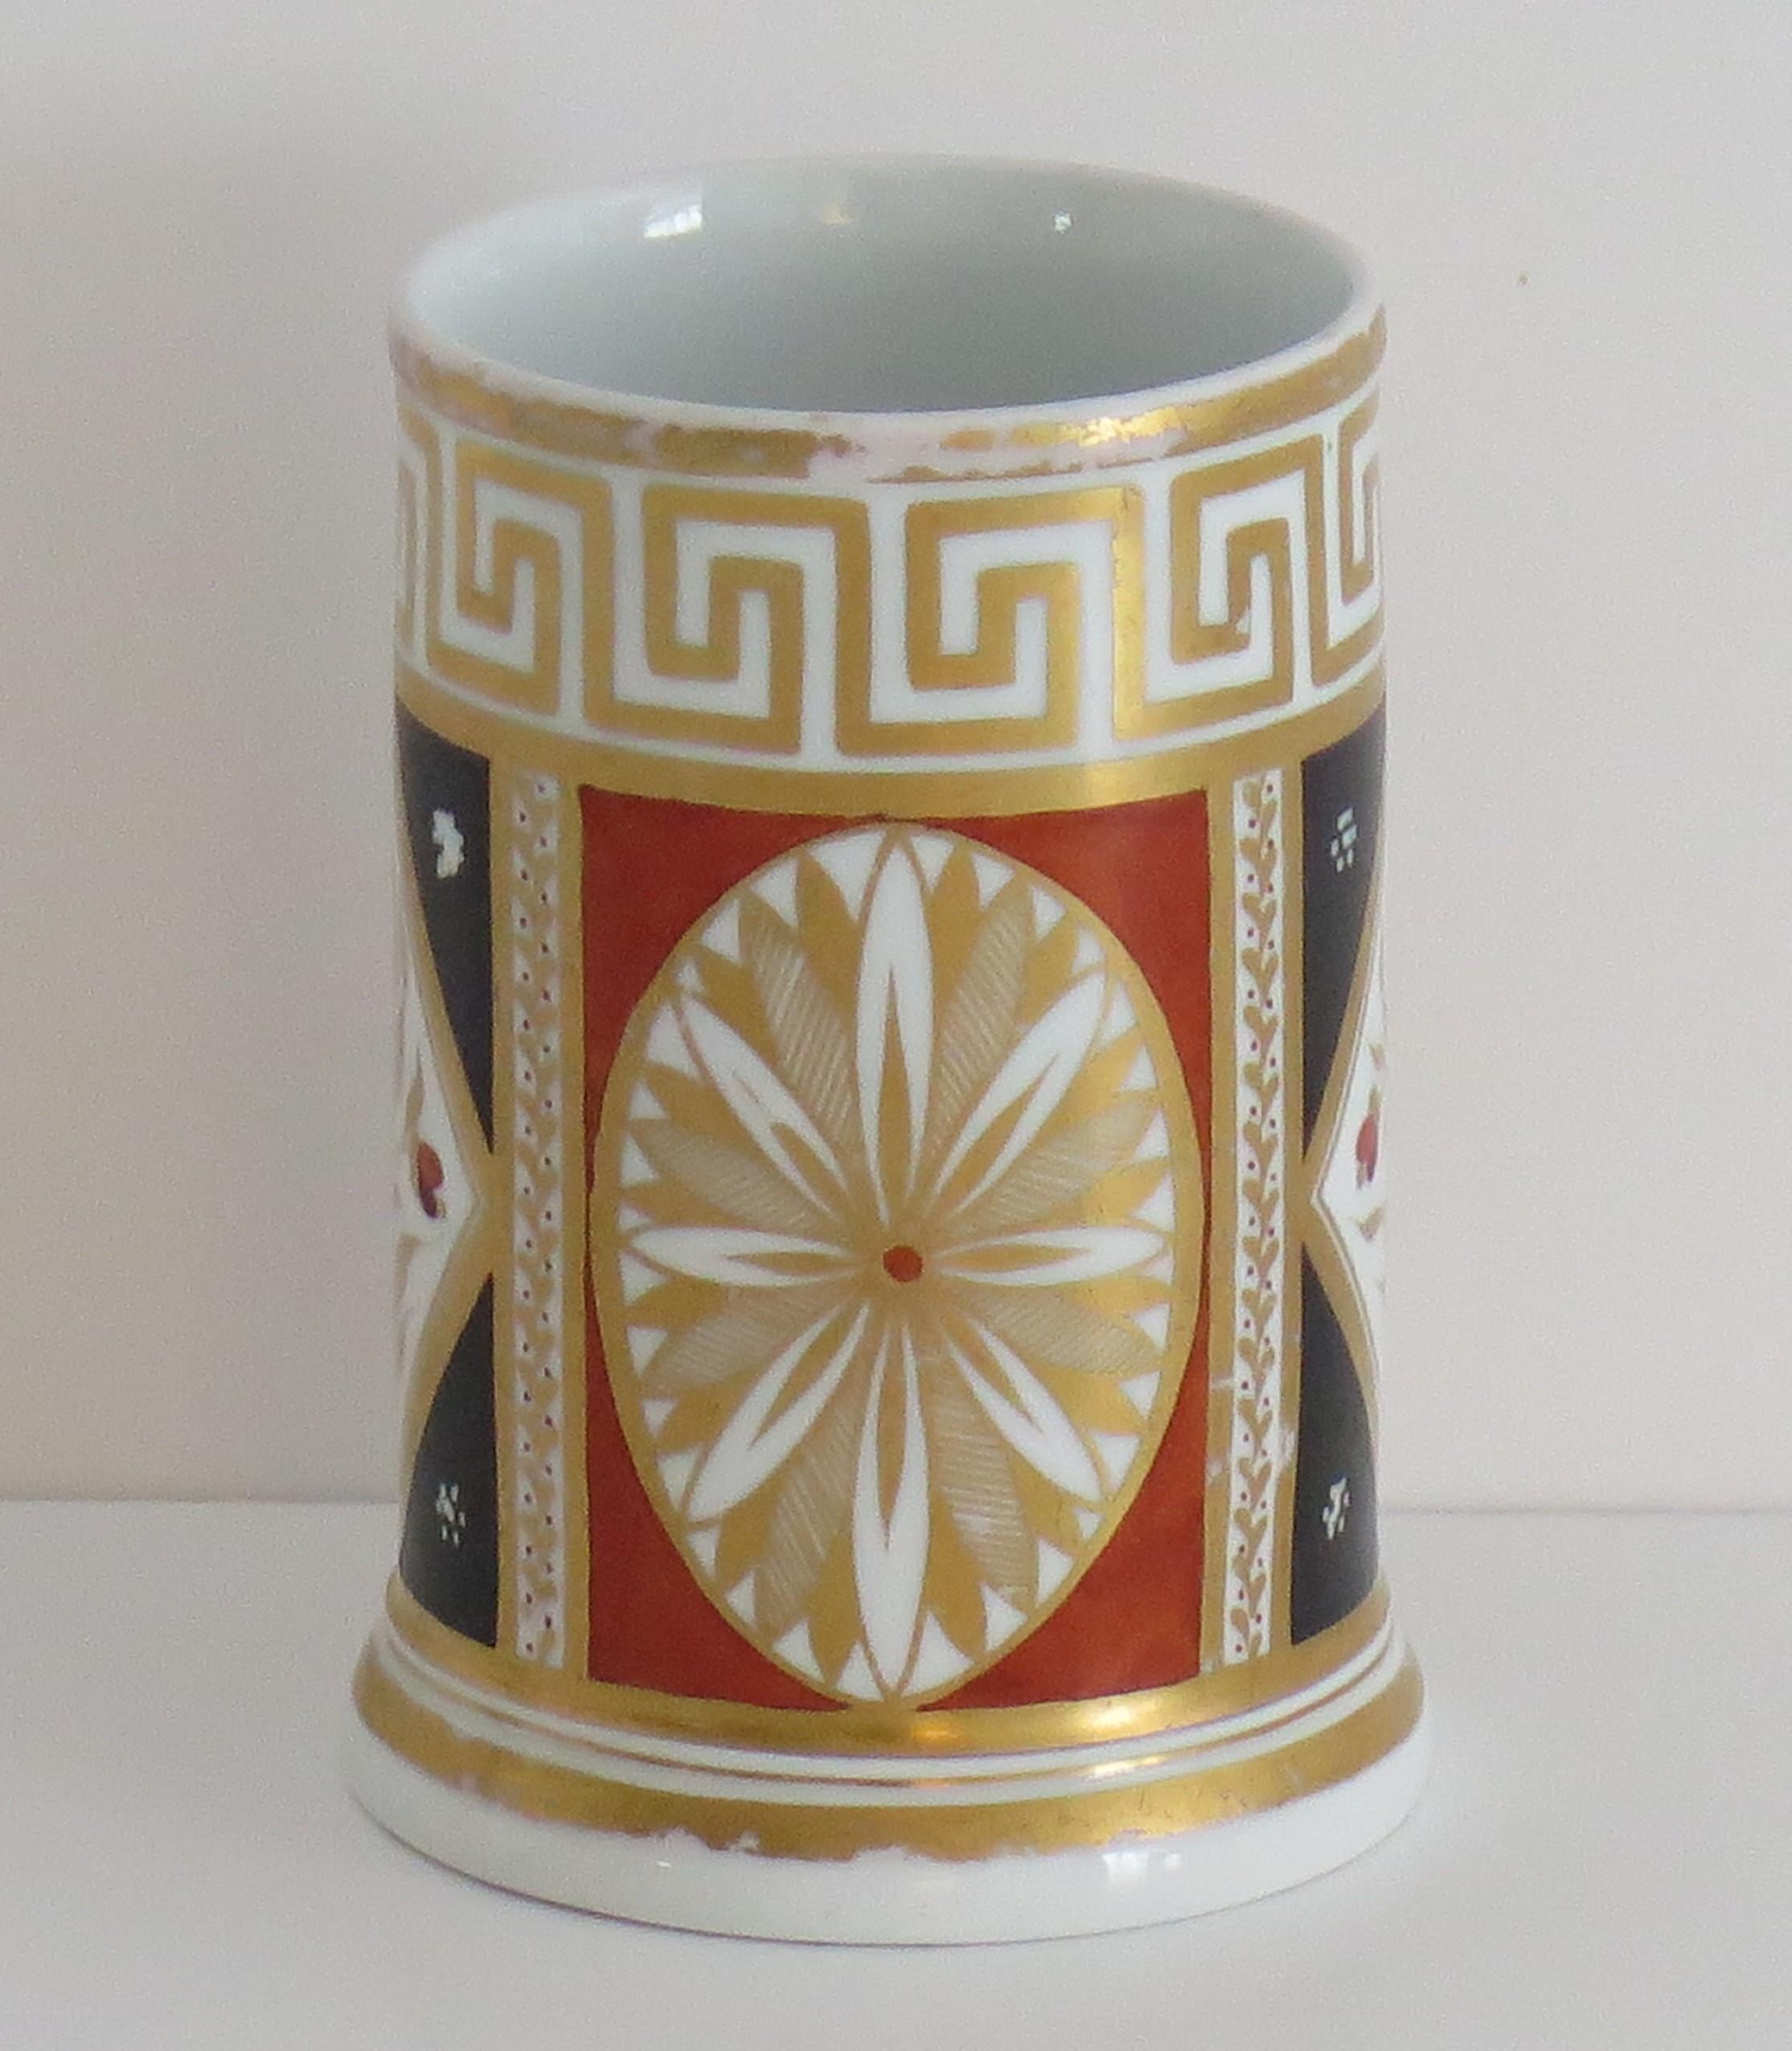 This is a good quality porcelain Spill vase which we attribute to Coalport, England, circa 1810.

The vase is well potted with a very white glaze 

It is well hand decorated with four alternating vertical panels in pattern number 90, with a